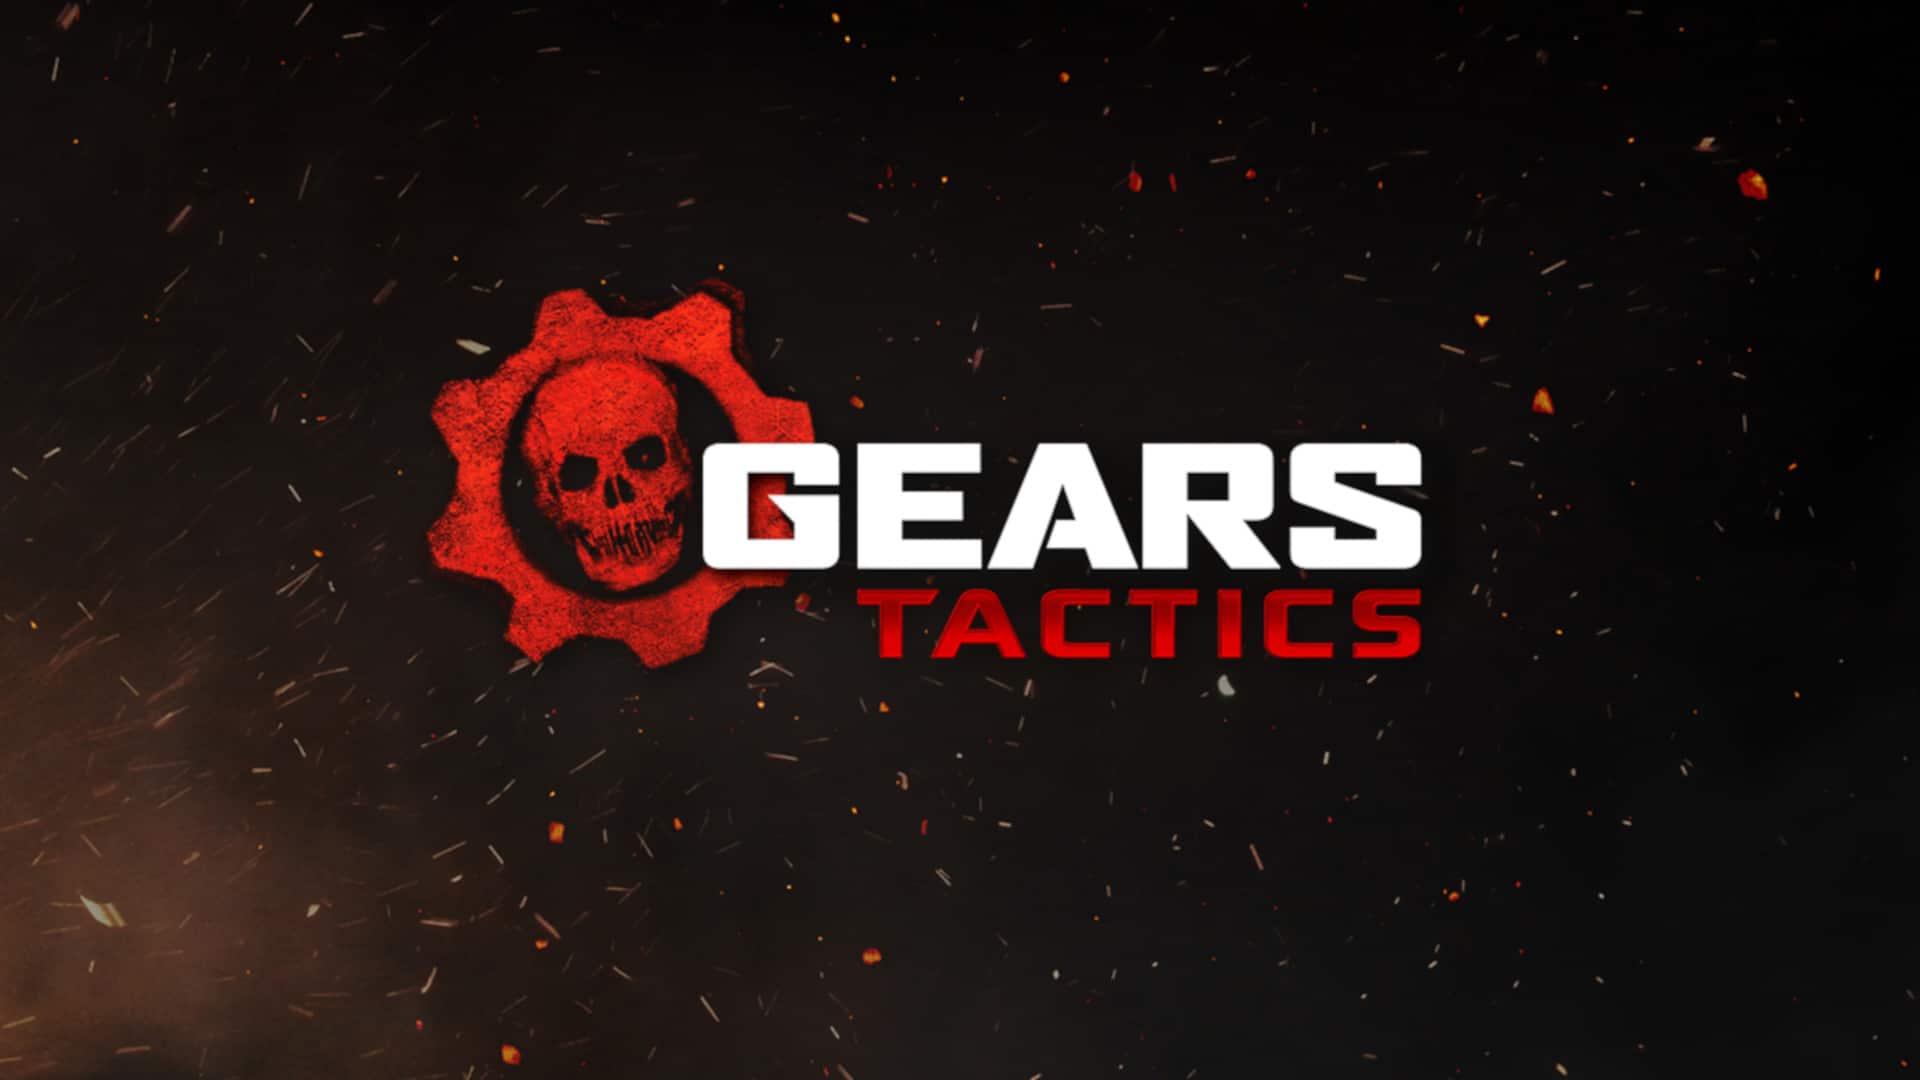 Gears Tactics Will Be Shown At The Game Awards 2019